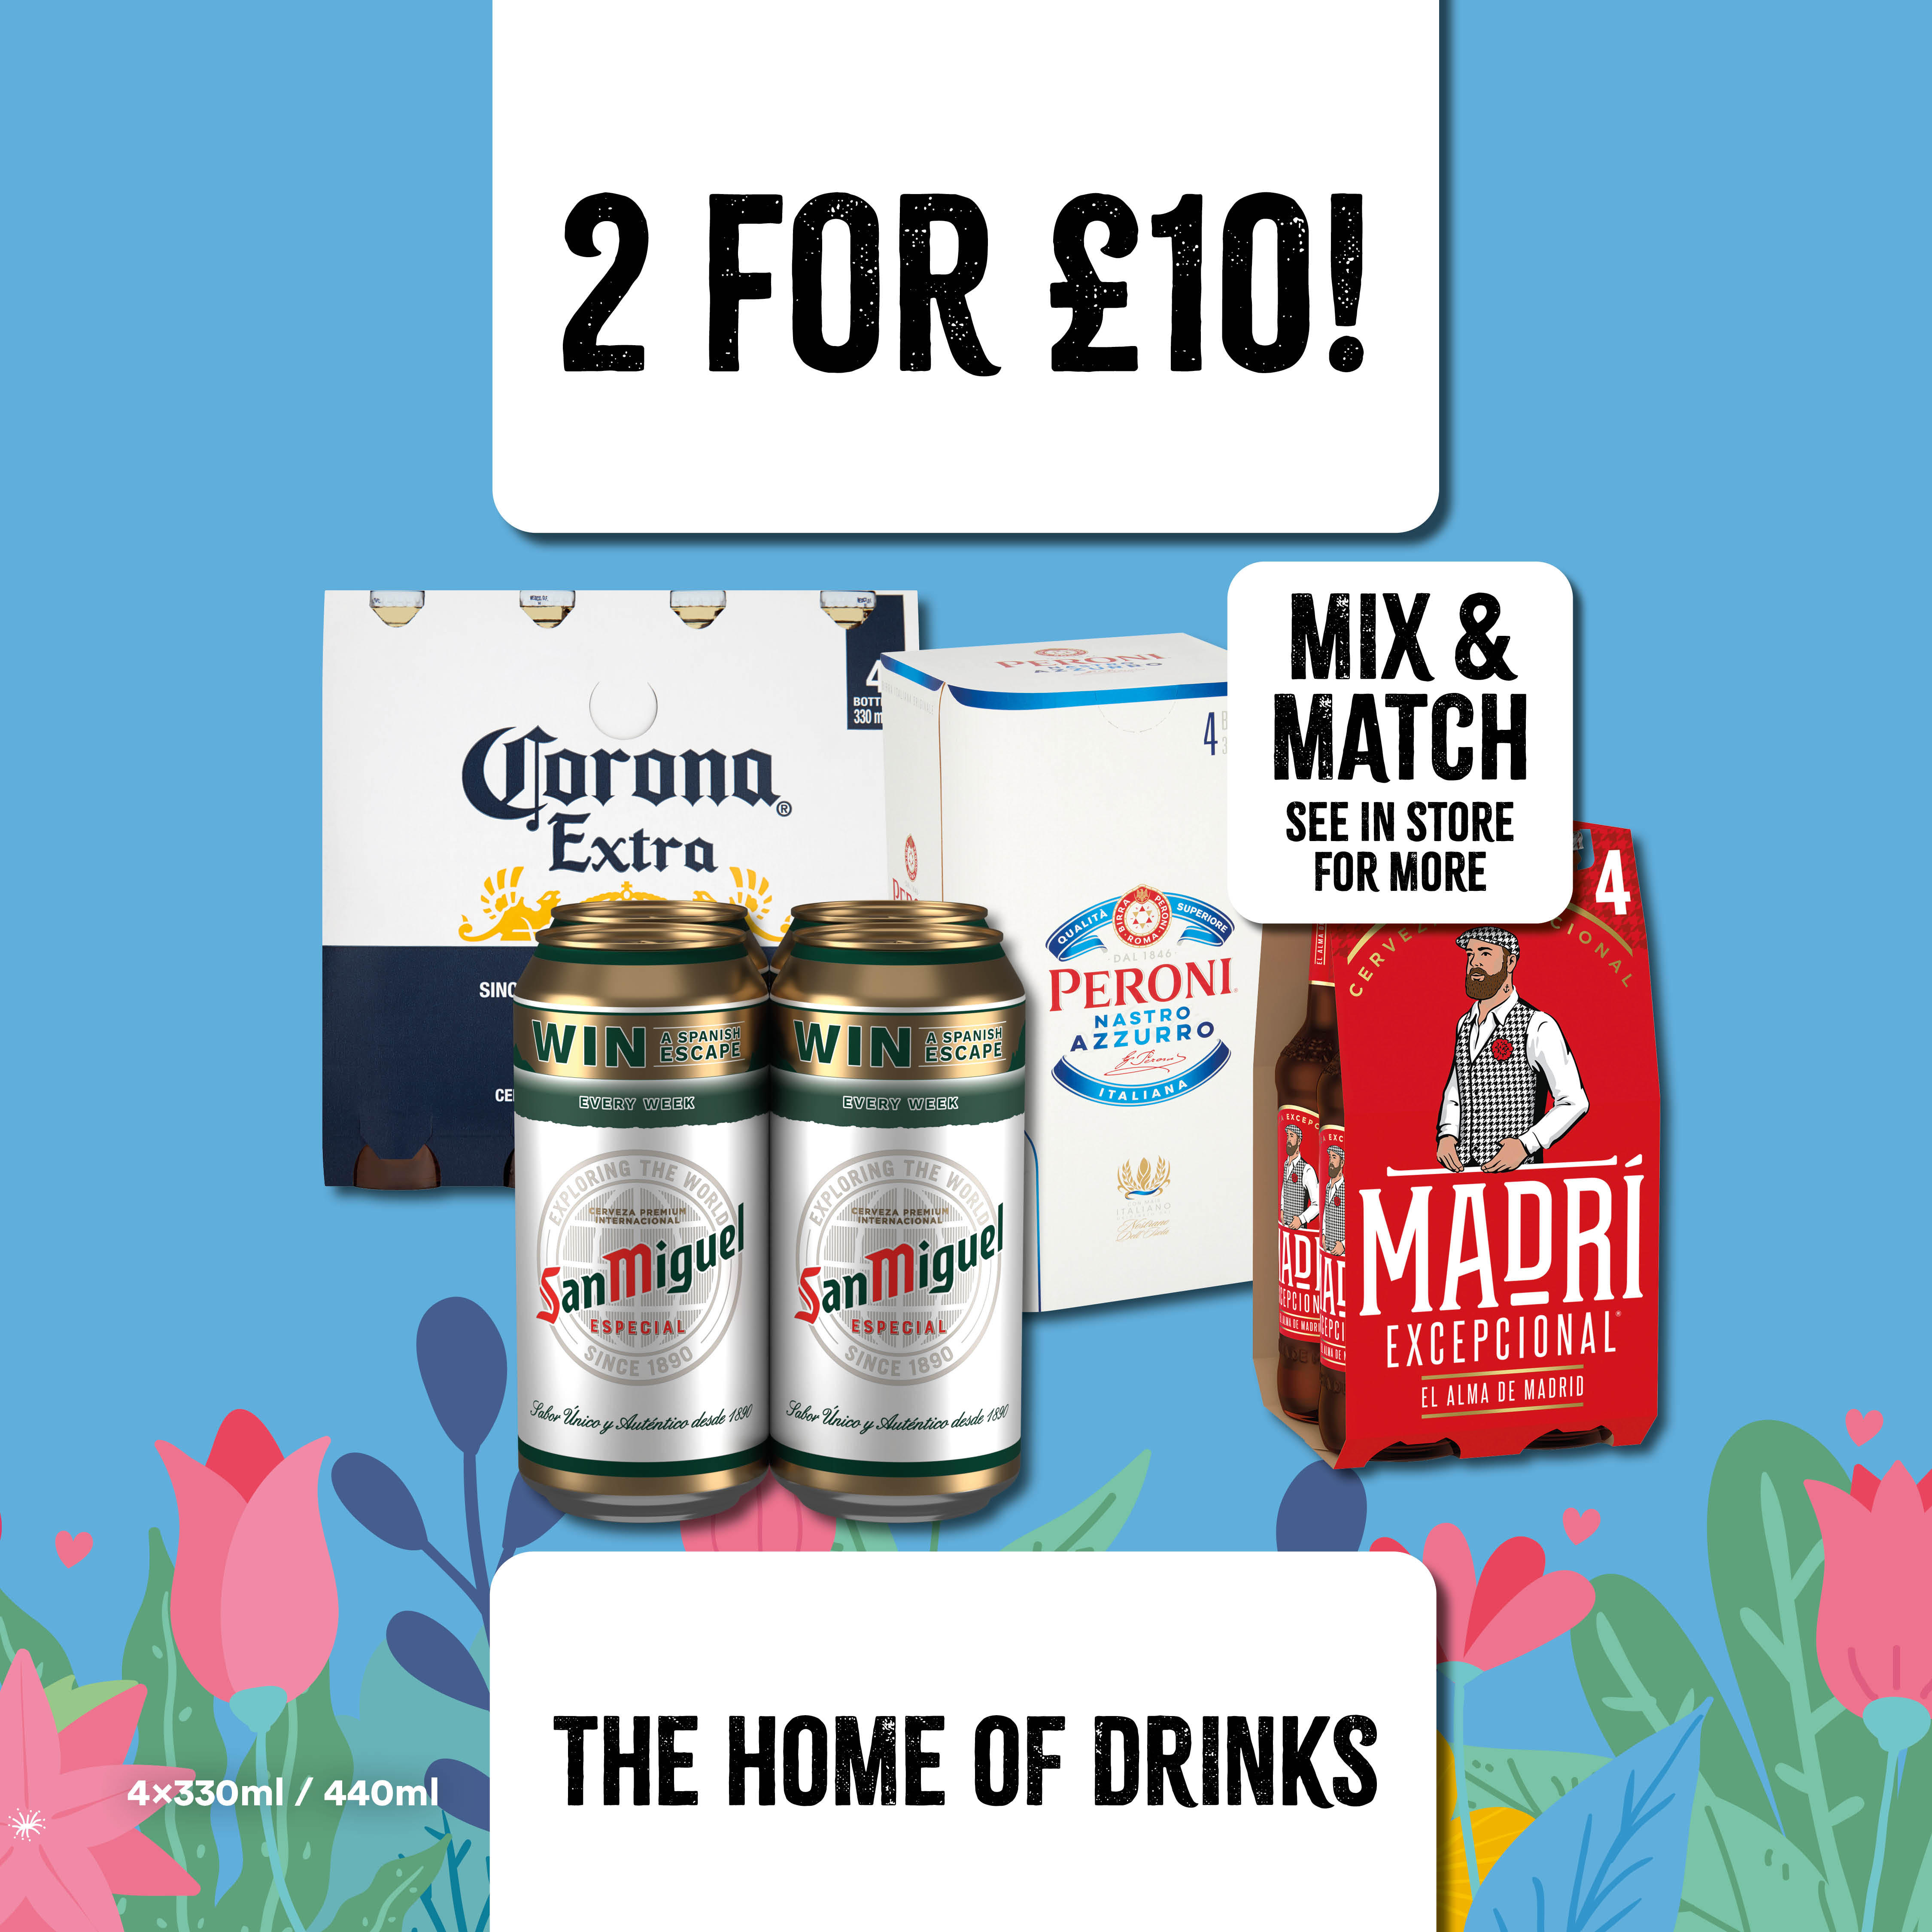 2 for £10 on selected beers Bargain Booze (Upton Priory, Macclesfield) Macclesfield 01625 869004